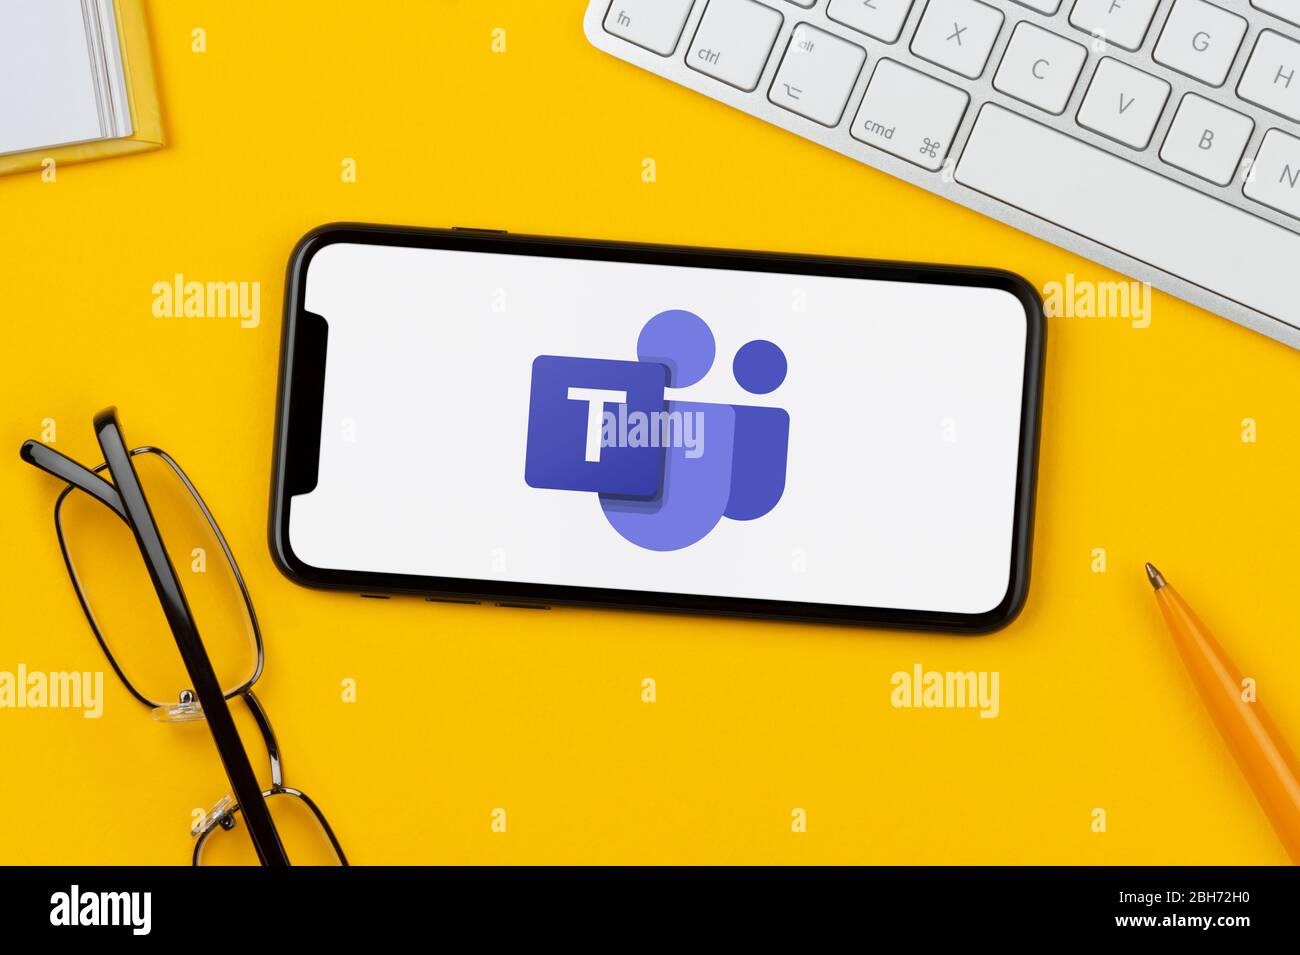 A smartphone showing the Microsoft Teams logo rests on a yellow background along with a keyboard, glasses, pen and book (Editorial use only). Stock Photo